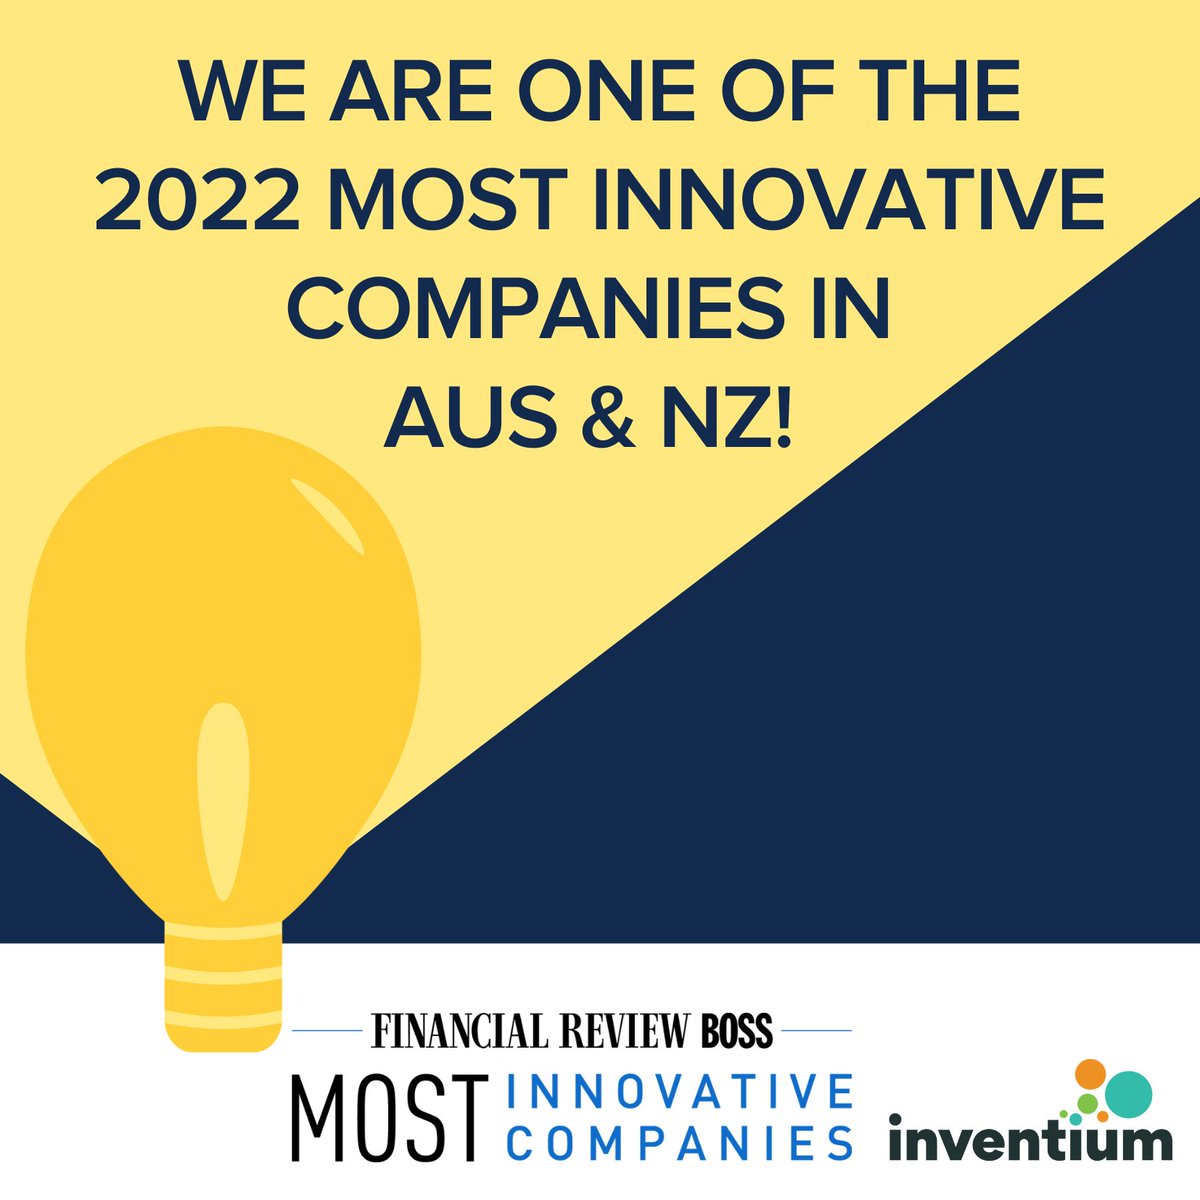 Honey Insurance has been named as one of the top 10 most innovative companies on 2022 The AFR BOSS Most Innovative Companies List in the category of Banking, Superannuation, and Financial Services! @FinancialReview #AFRBOSS #mostinnovative2022